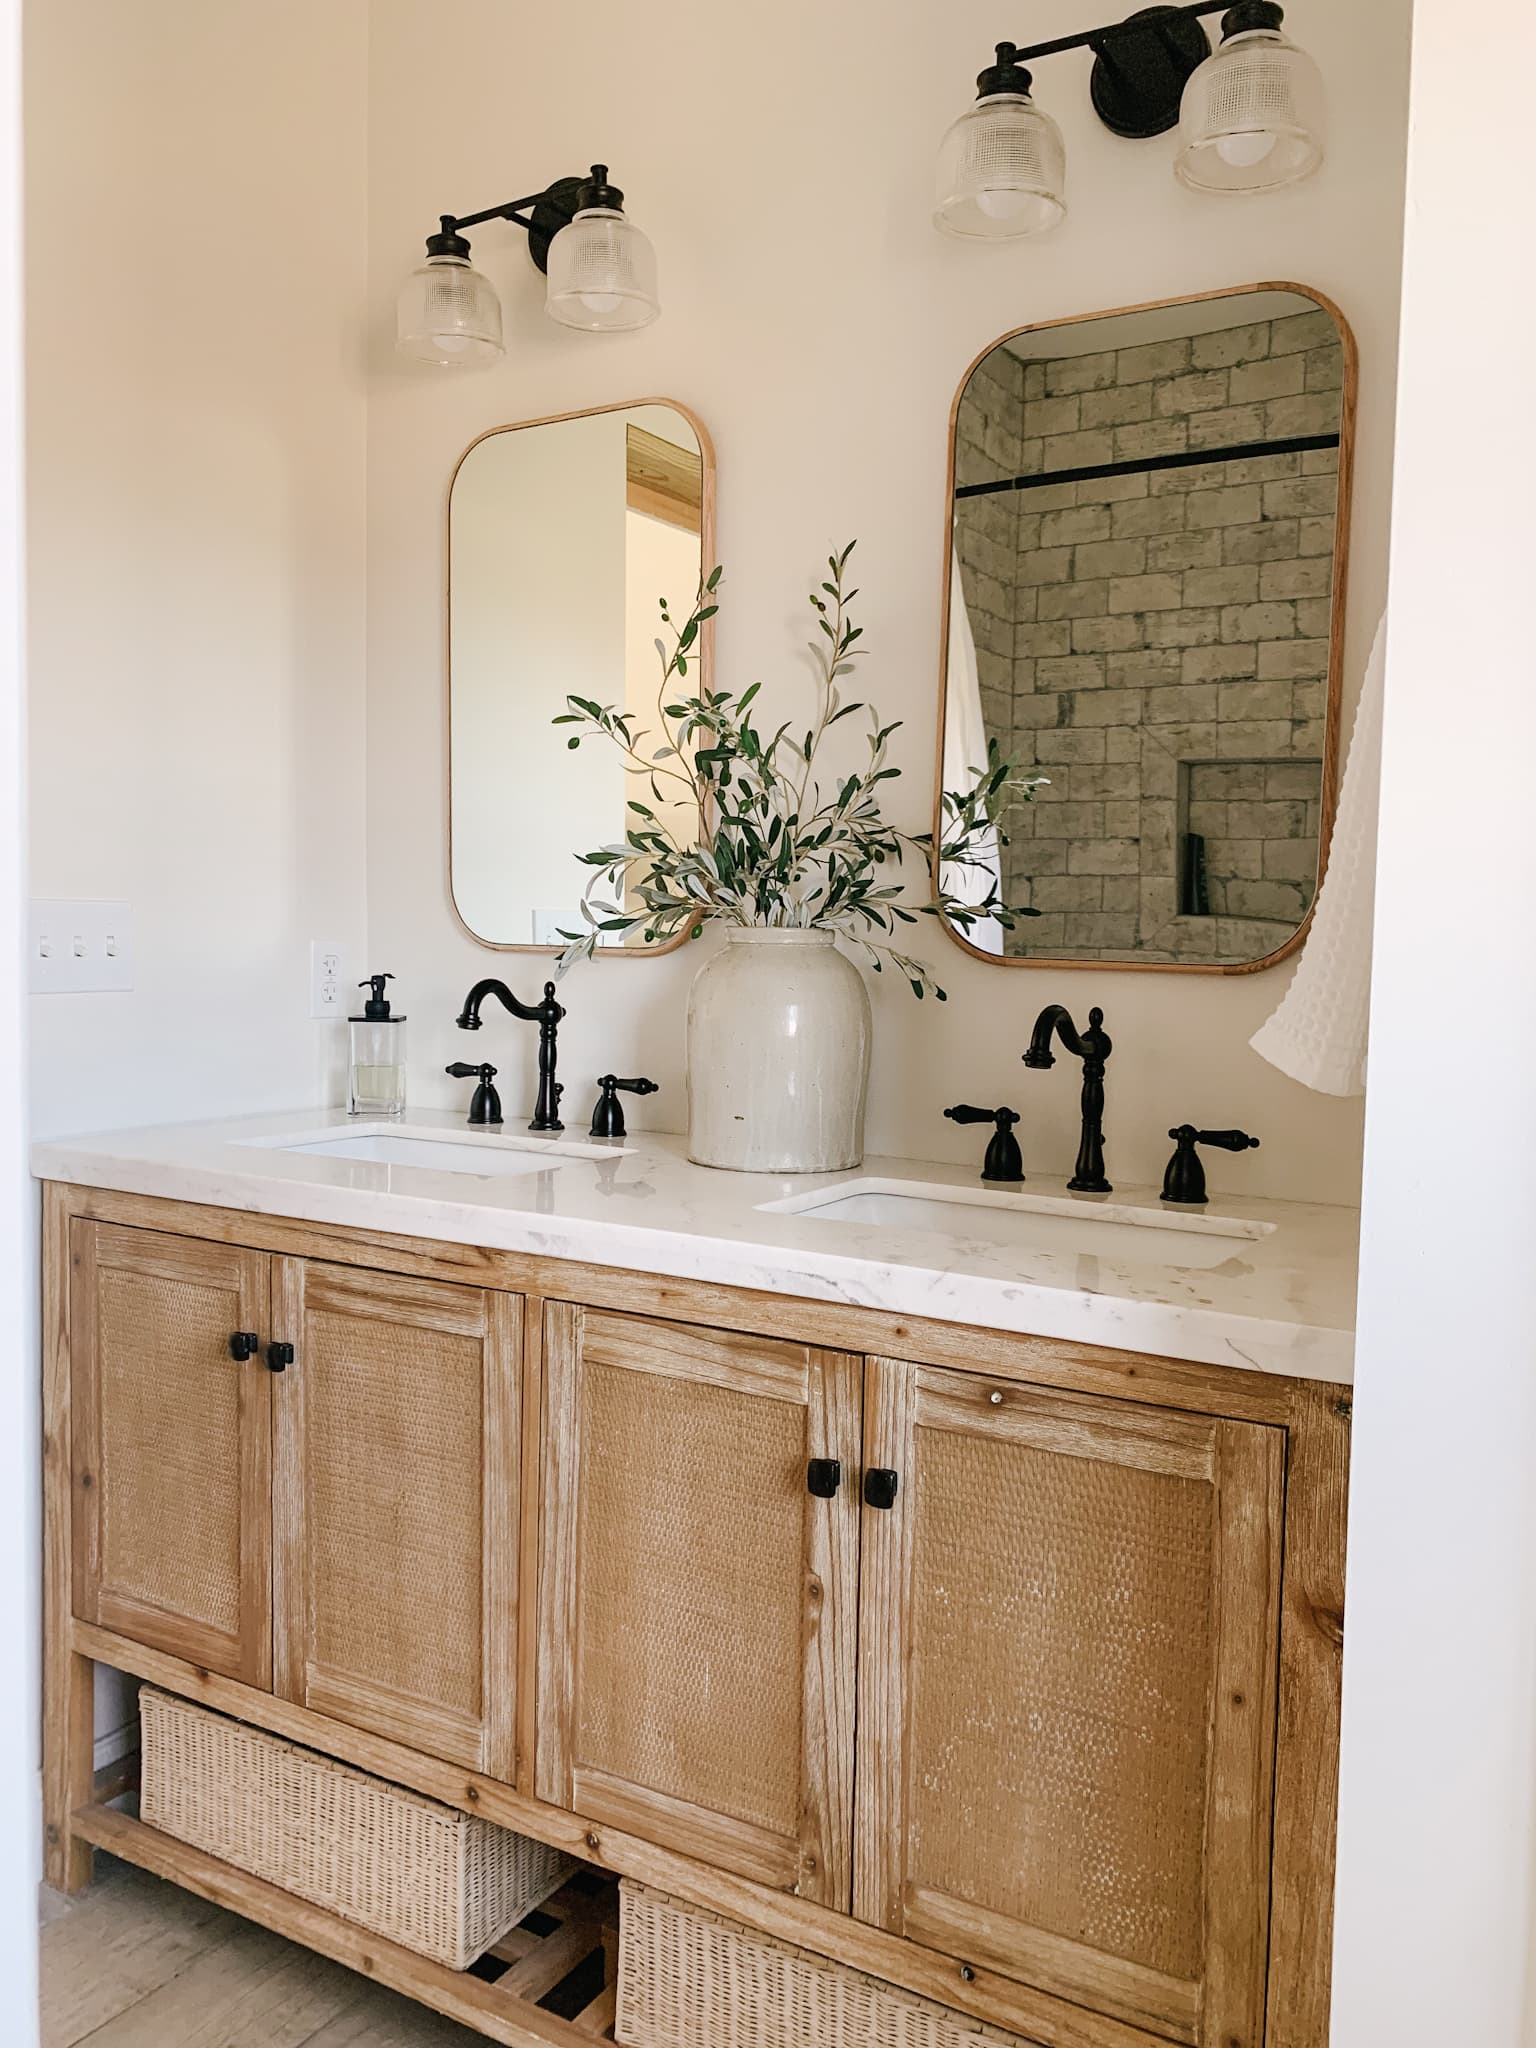 Changes to Make in Your Bathroom That Have a Big Impact